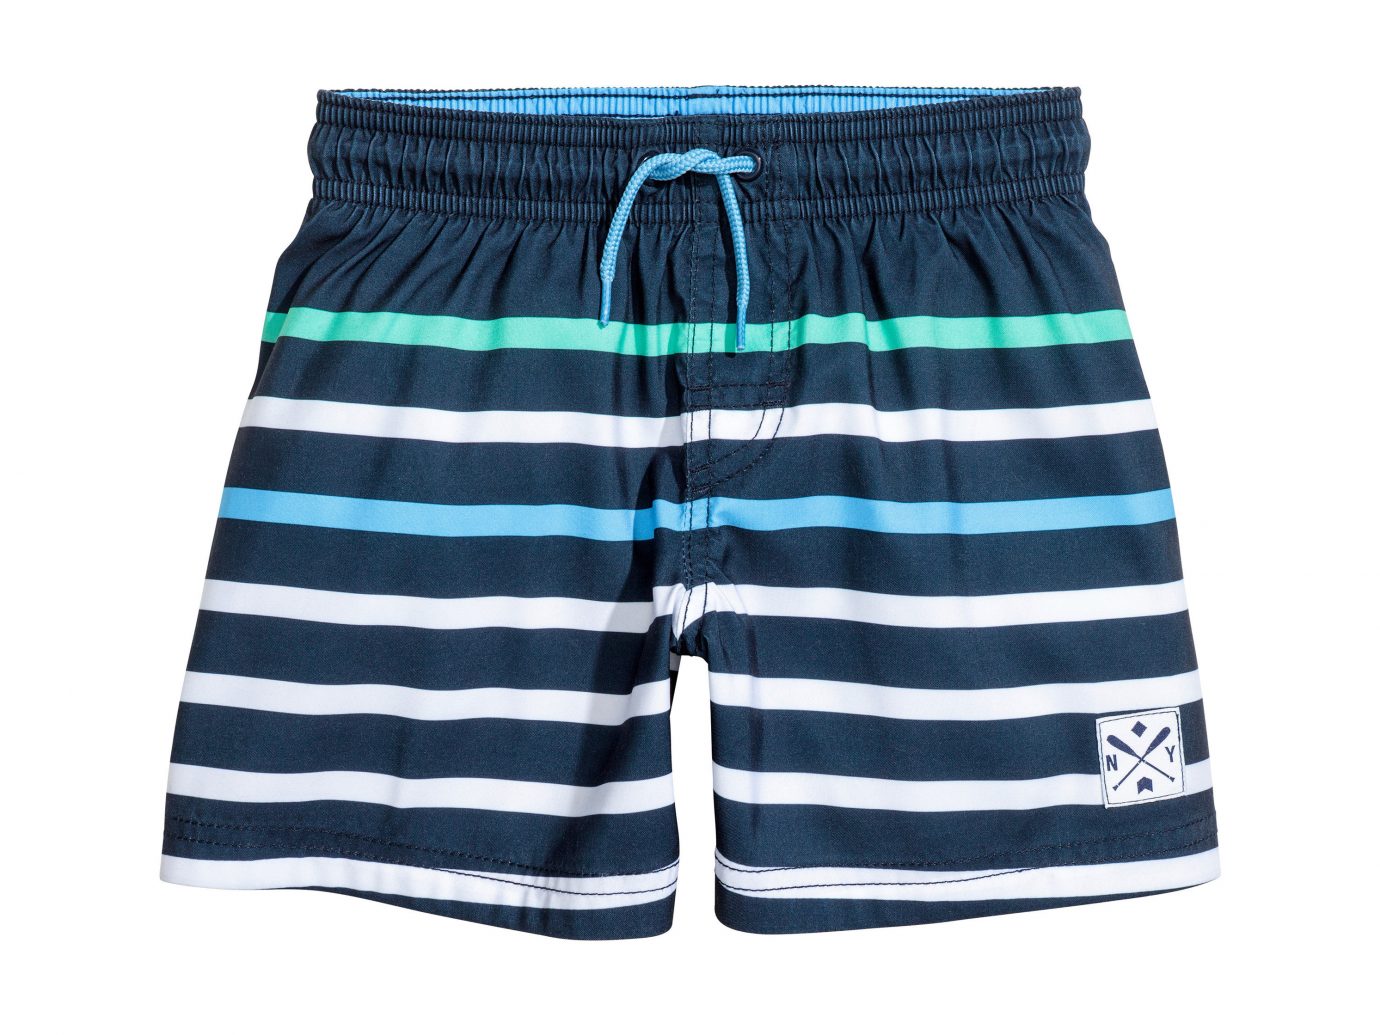 Style + Design clothing active shorts striped shorts trunks product electric blue bermuda shorts trouser underpants